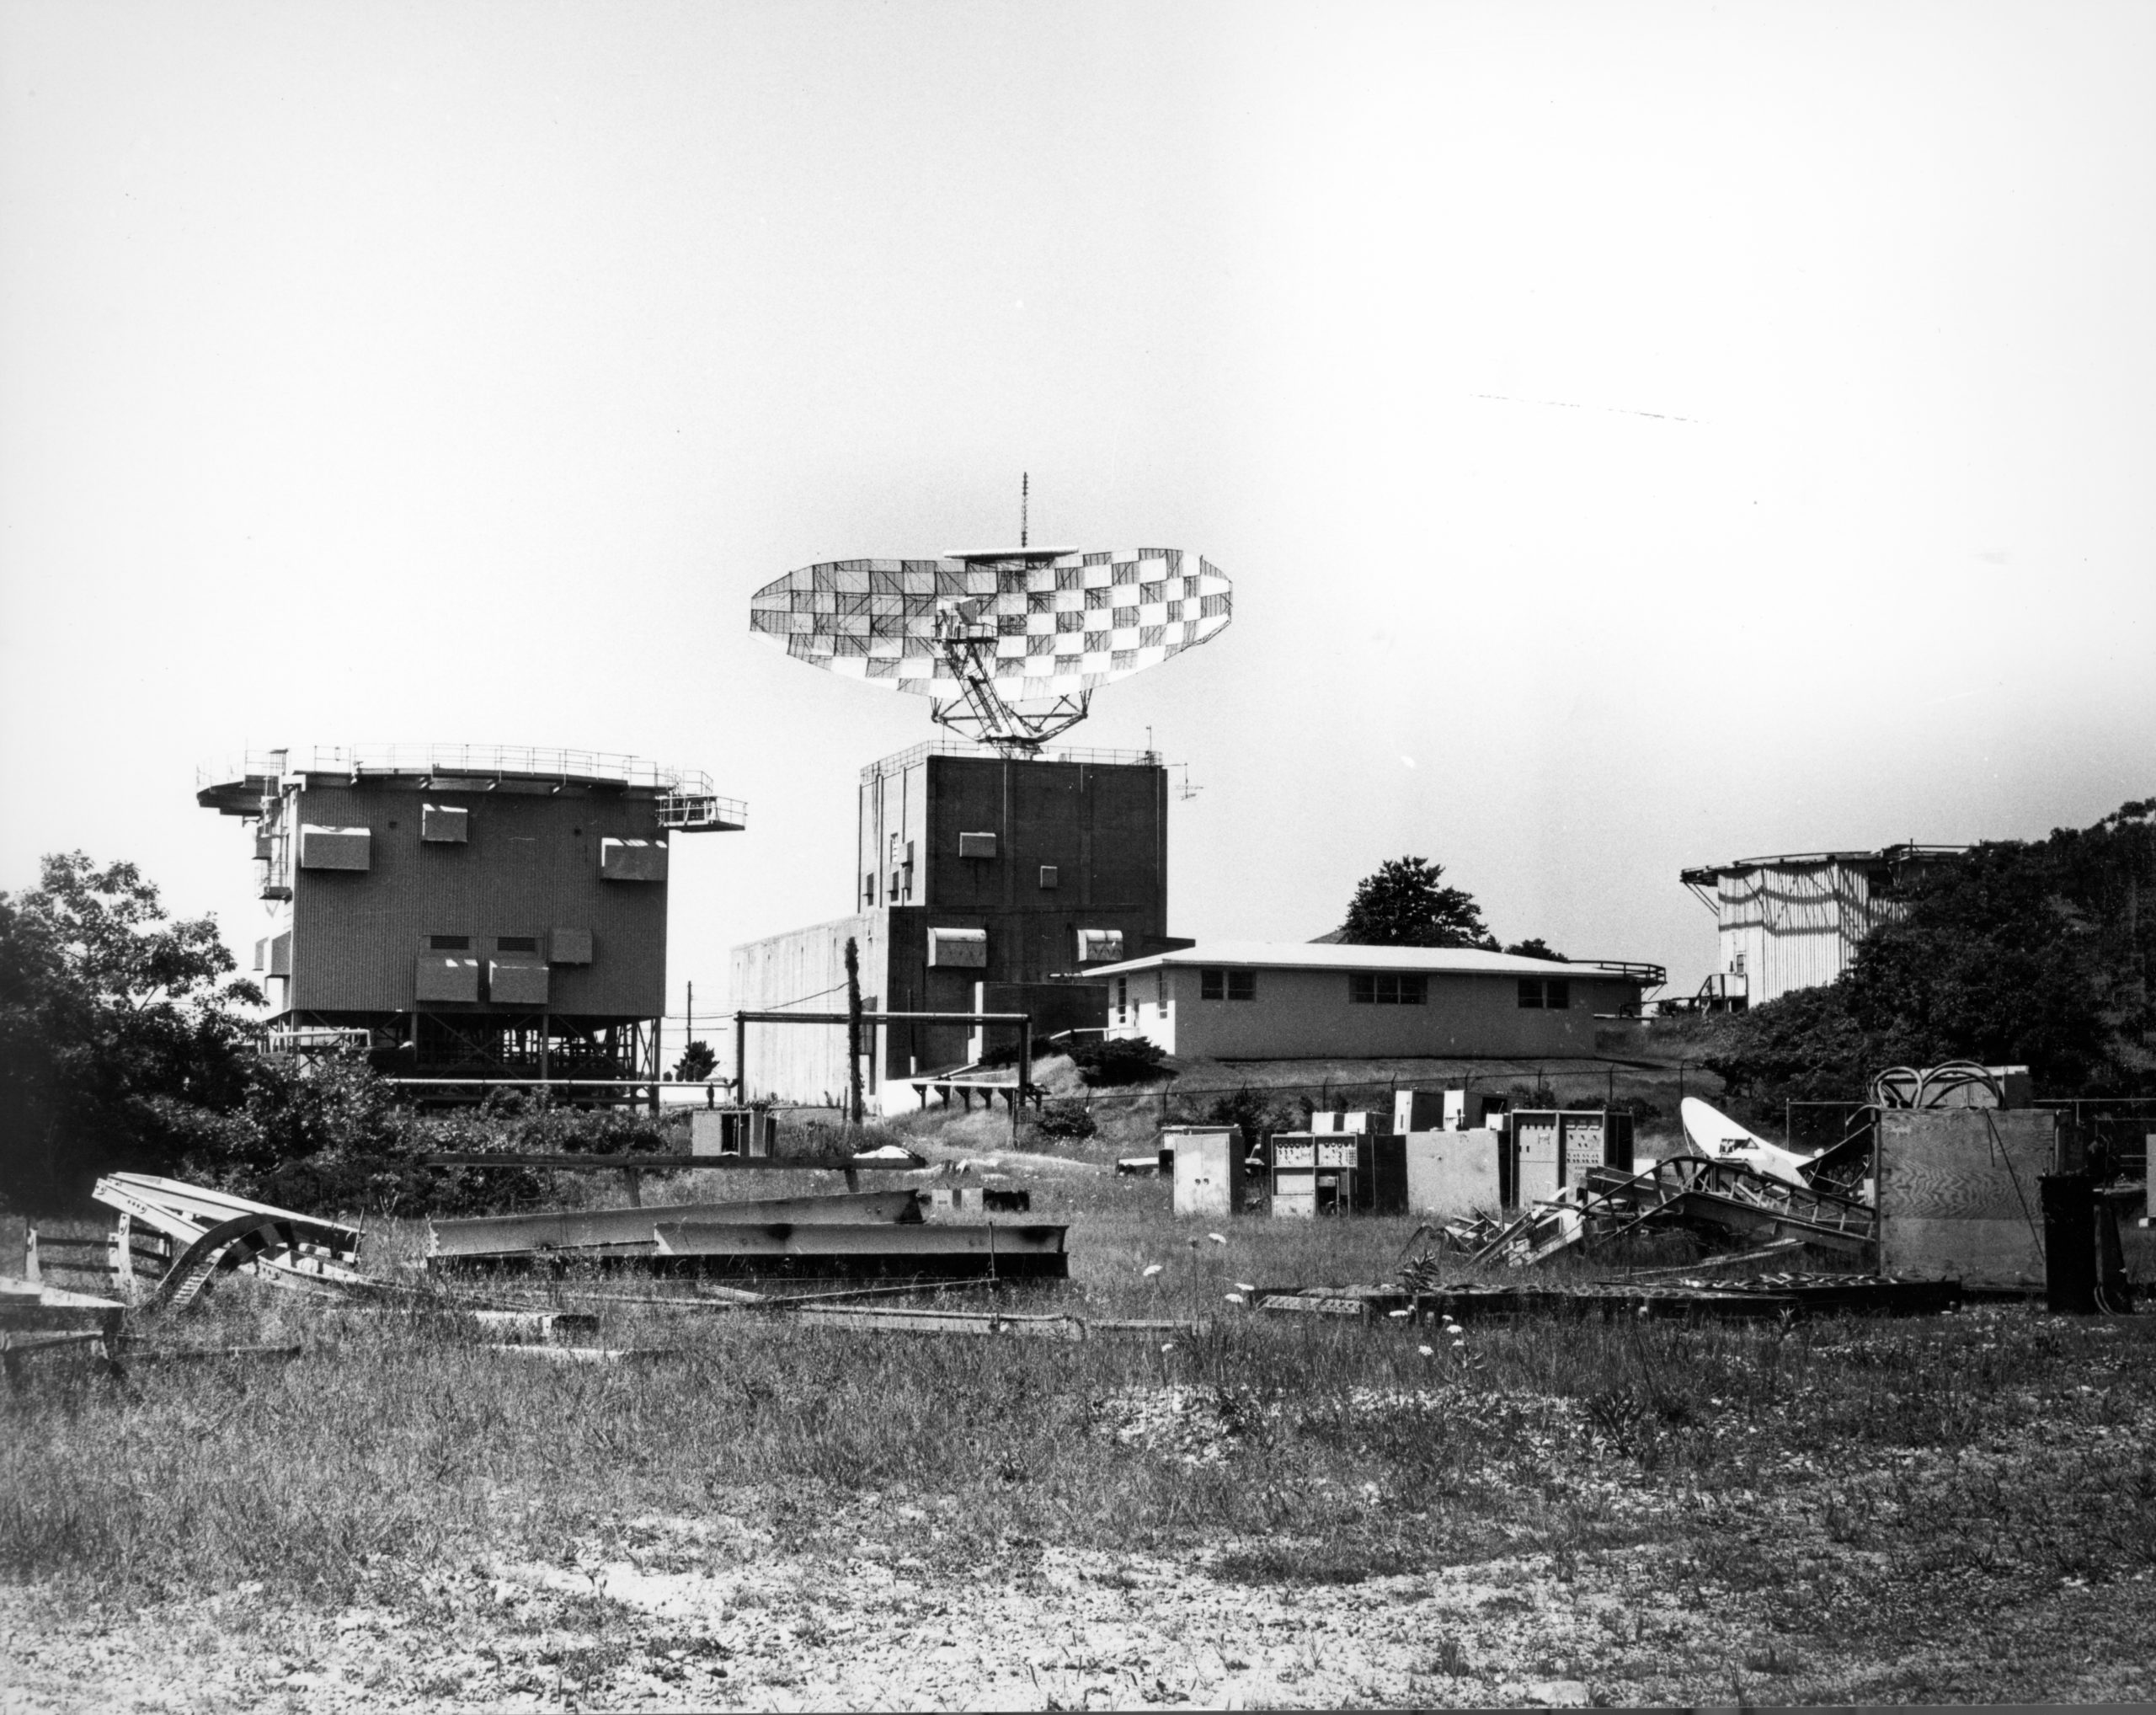 Camp Hero in Montauk was home to the 773rd Radar Squadron. Pictured is the radar facility in 1958.COURTESY MONTAUK PUBLIC LIBRARY